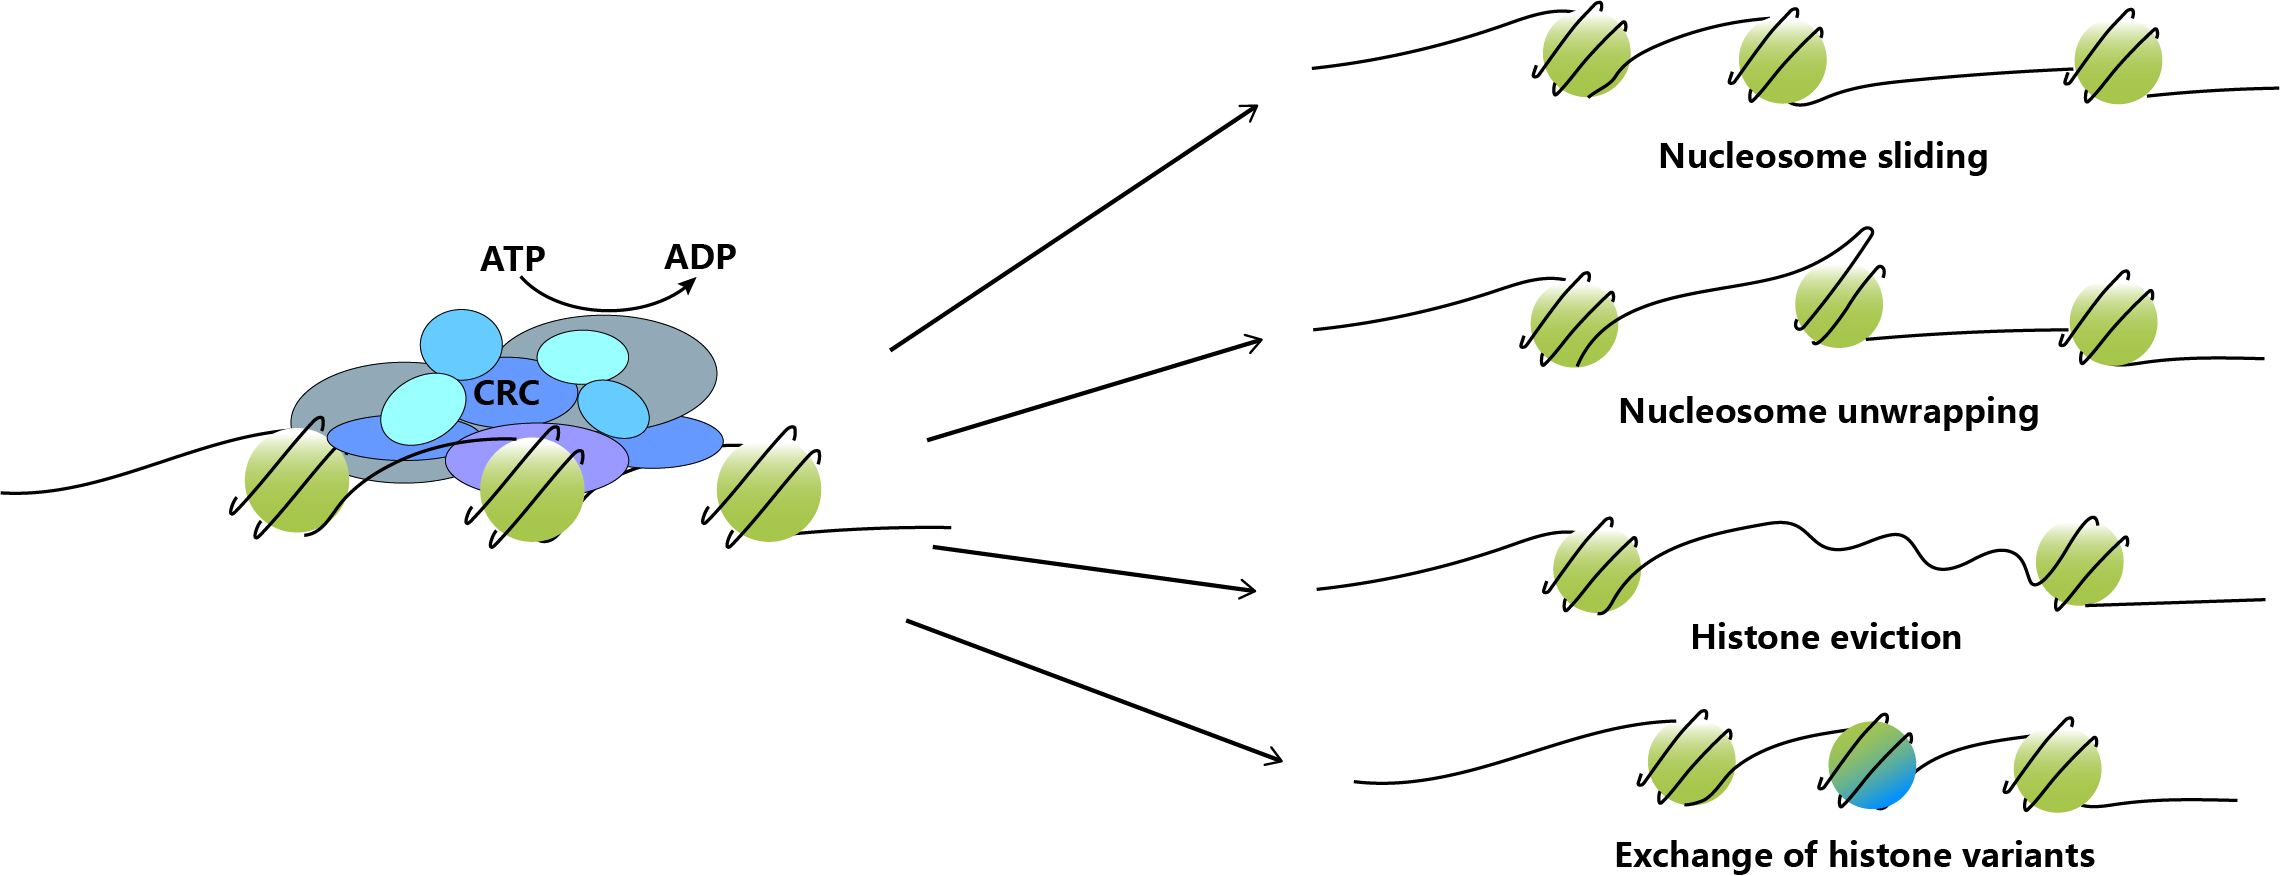 Schematic of the ATP-dependent nucleosome accessibility regulation.